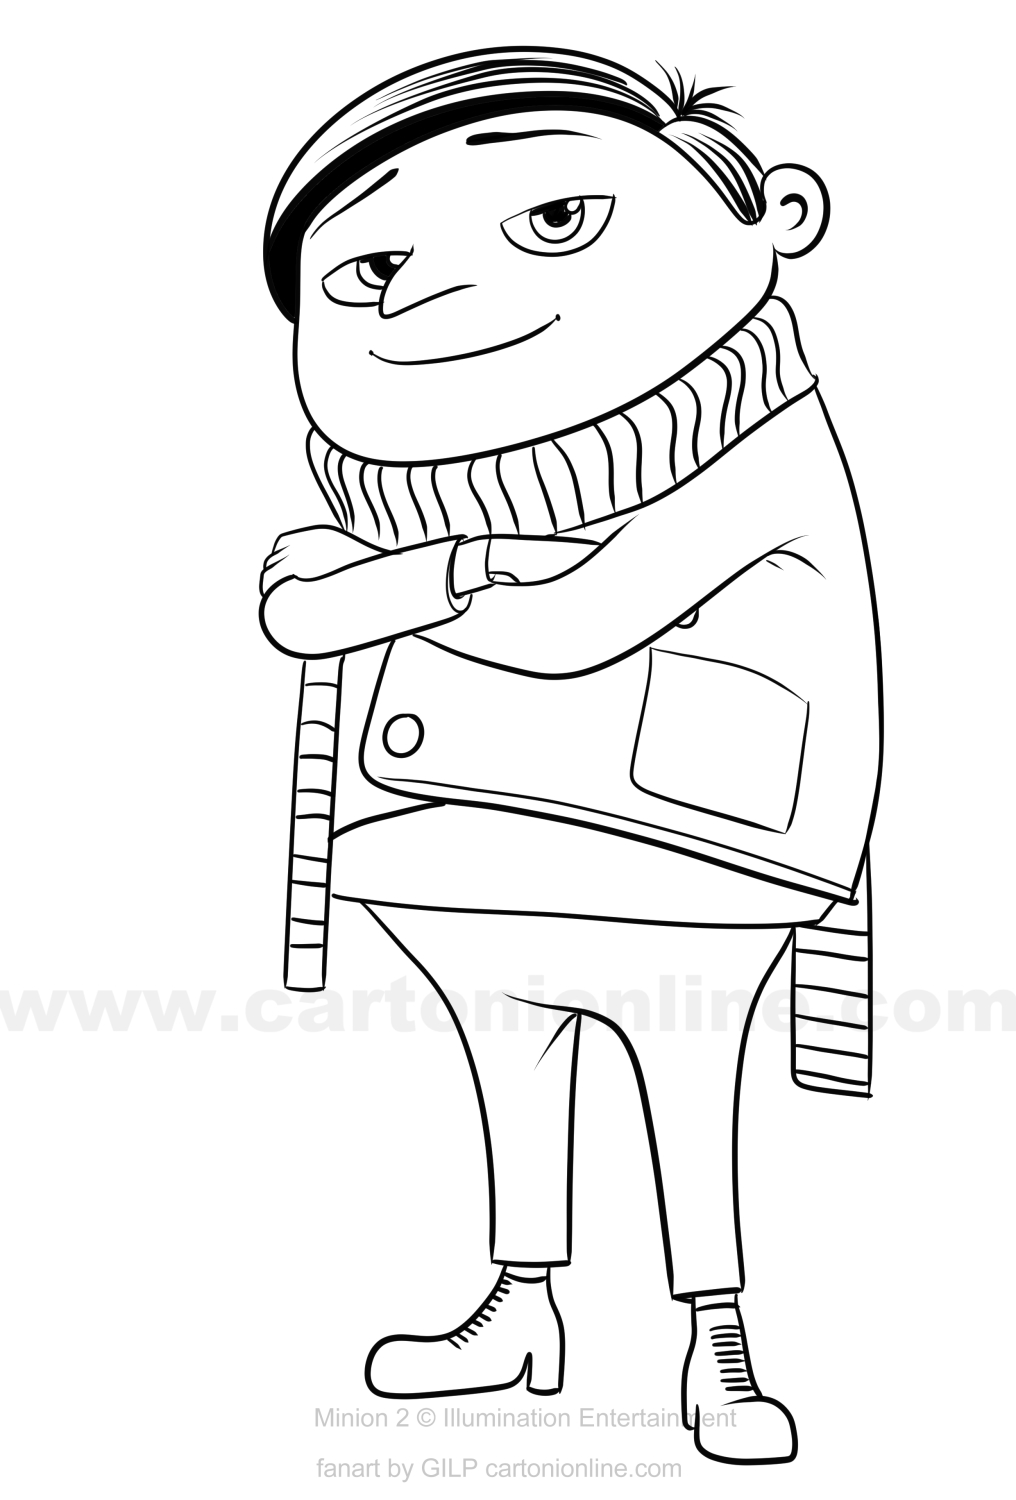 Gru from Minions: The Rise of Gru coloring page to print and coloring